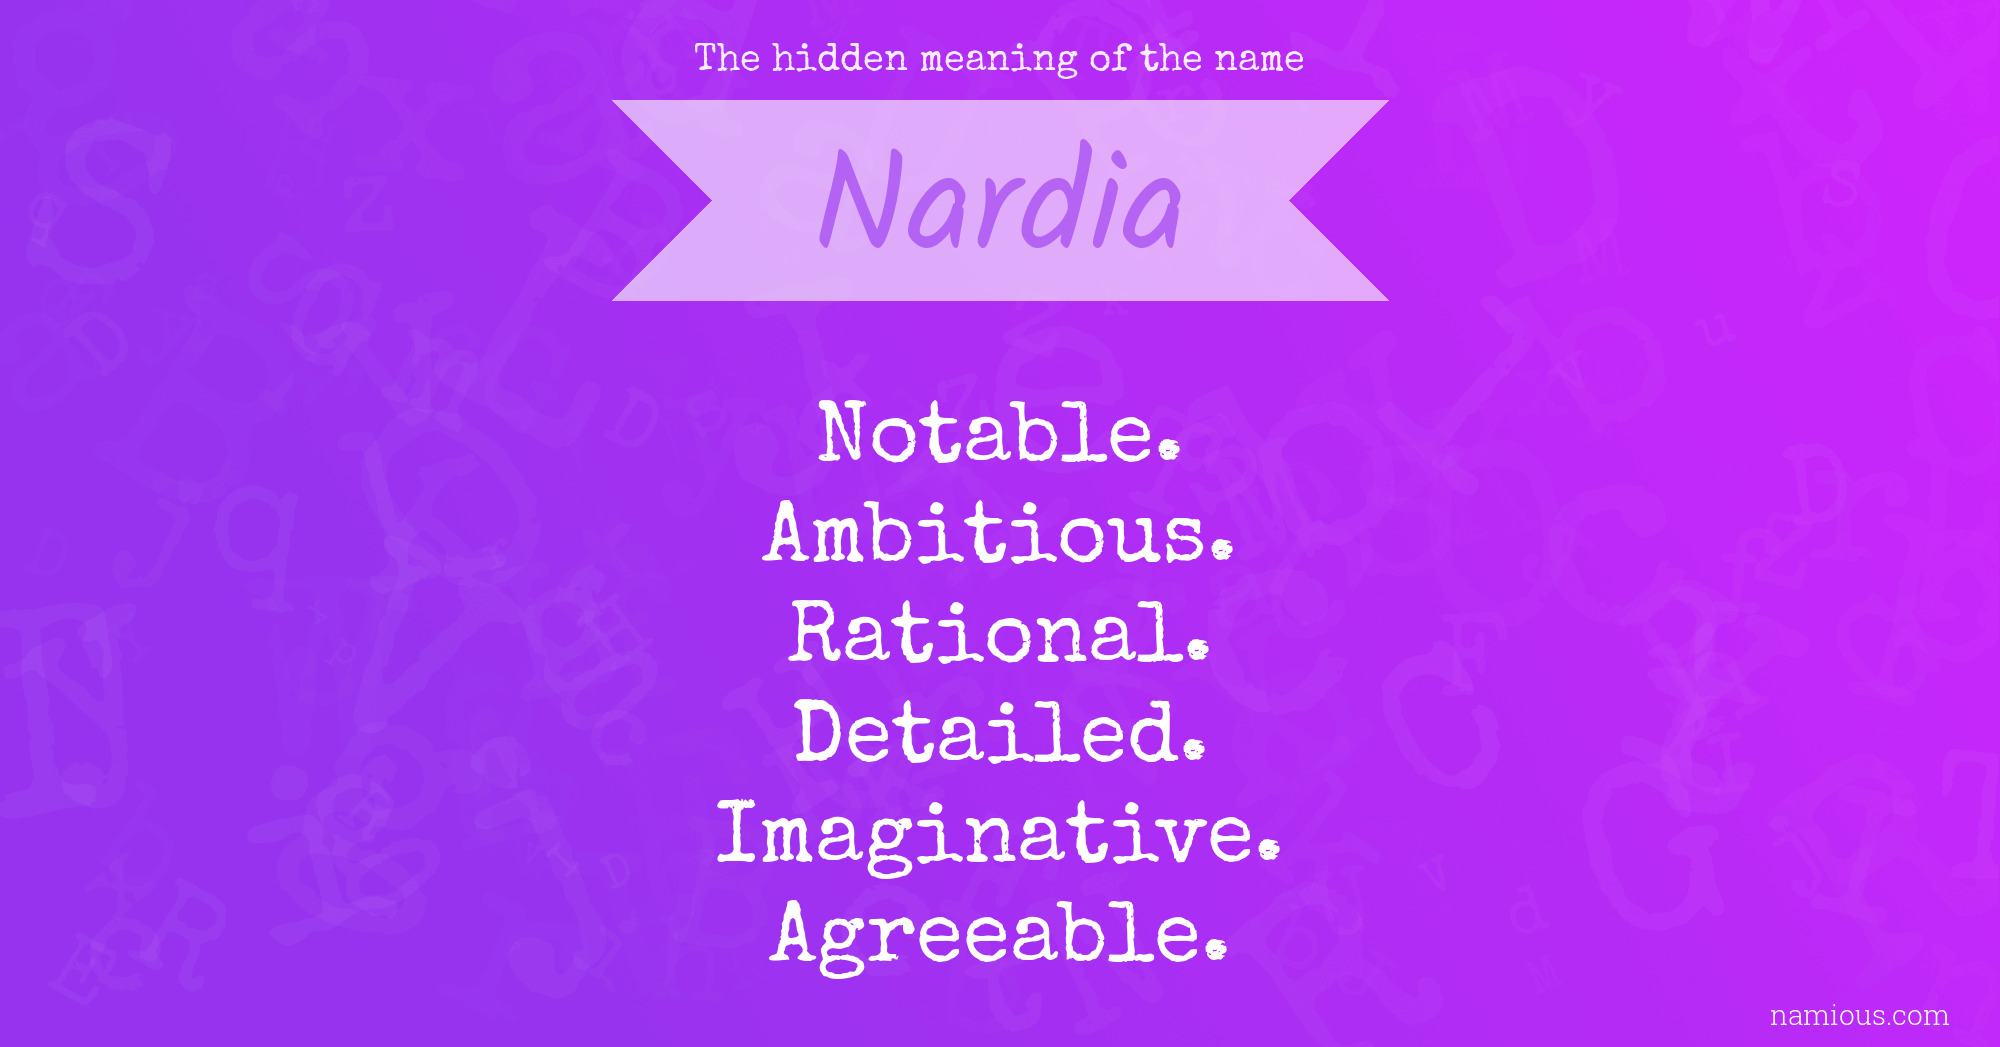 The hidden meaning of the name Nardia